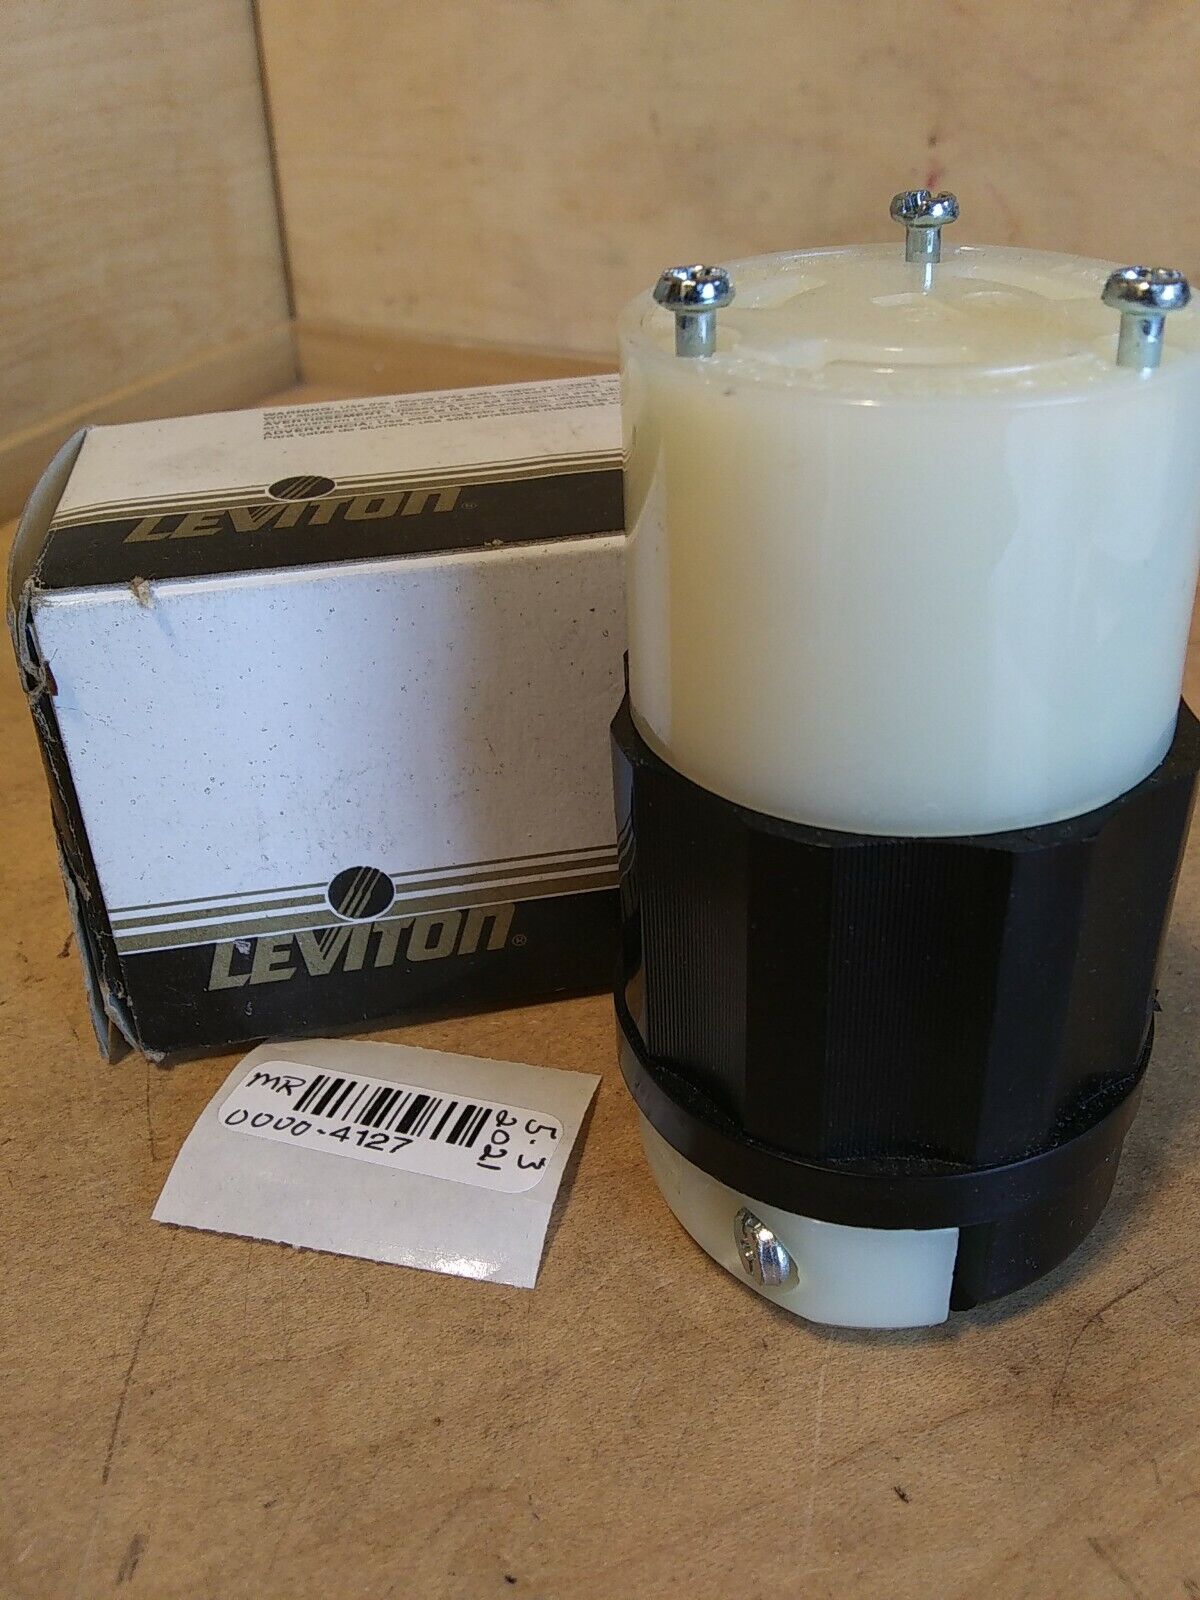 Leviton 2643 Locking Connector 2 Pole 3 Wire Grounding